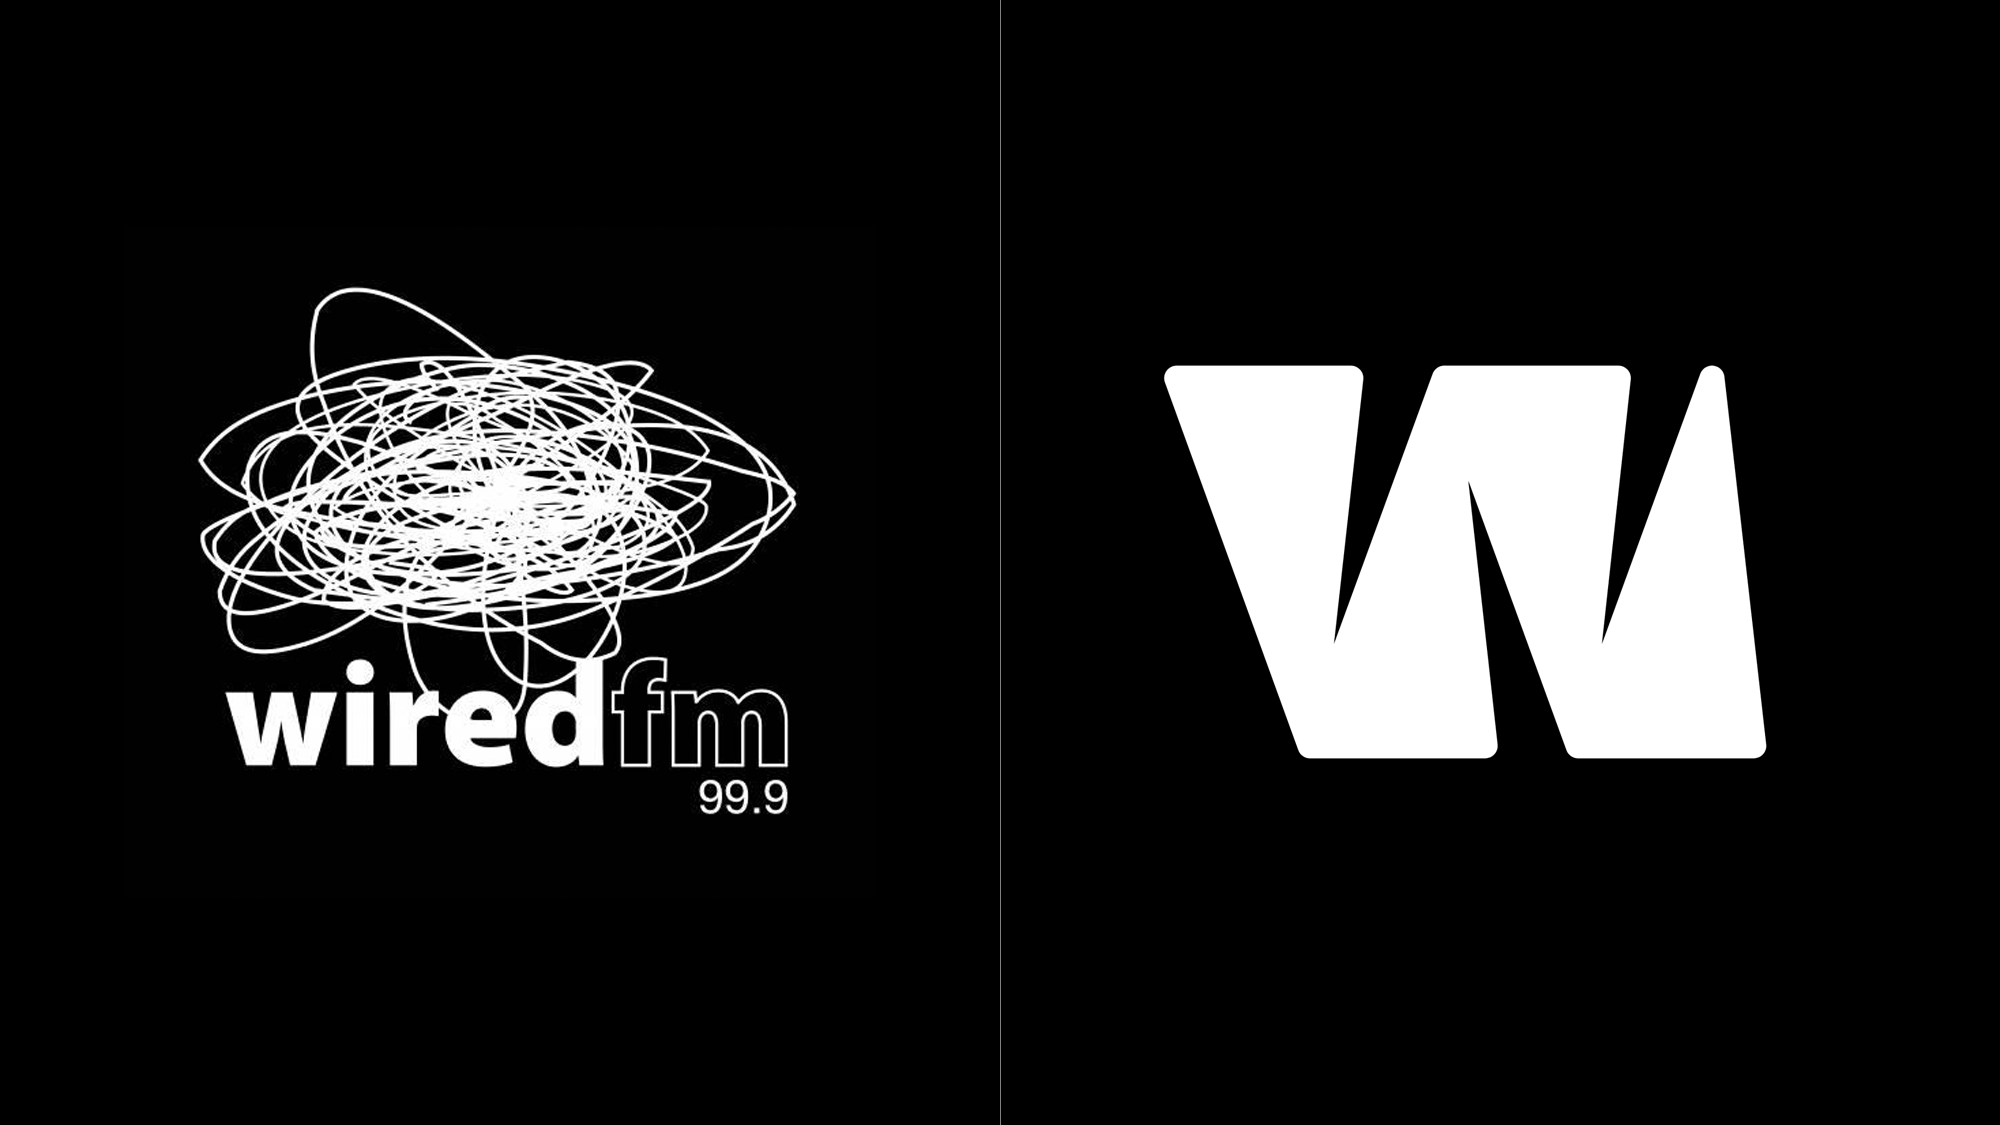 https://www.underconsideration.com/brandnew/wp/wp-content/uploads/2022/05/wired_99point9_fm_logo_before_after.gif